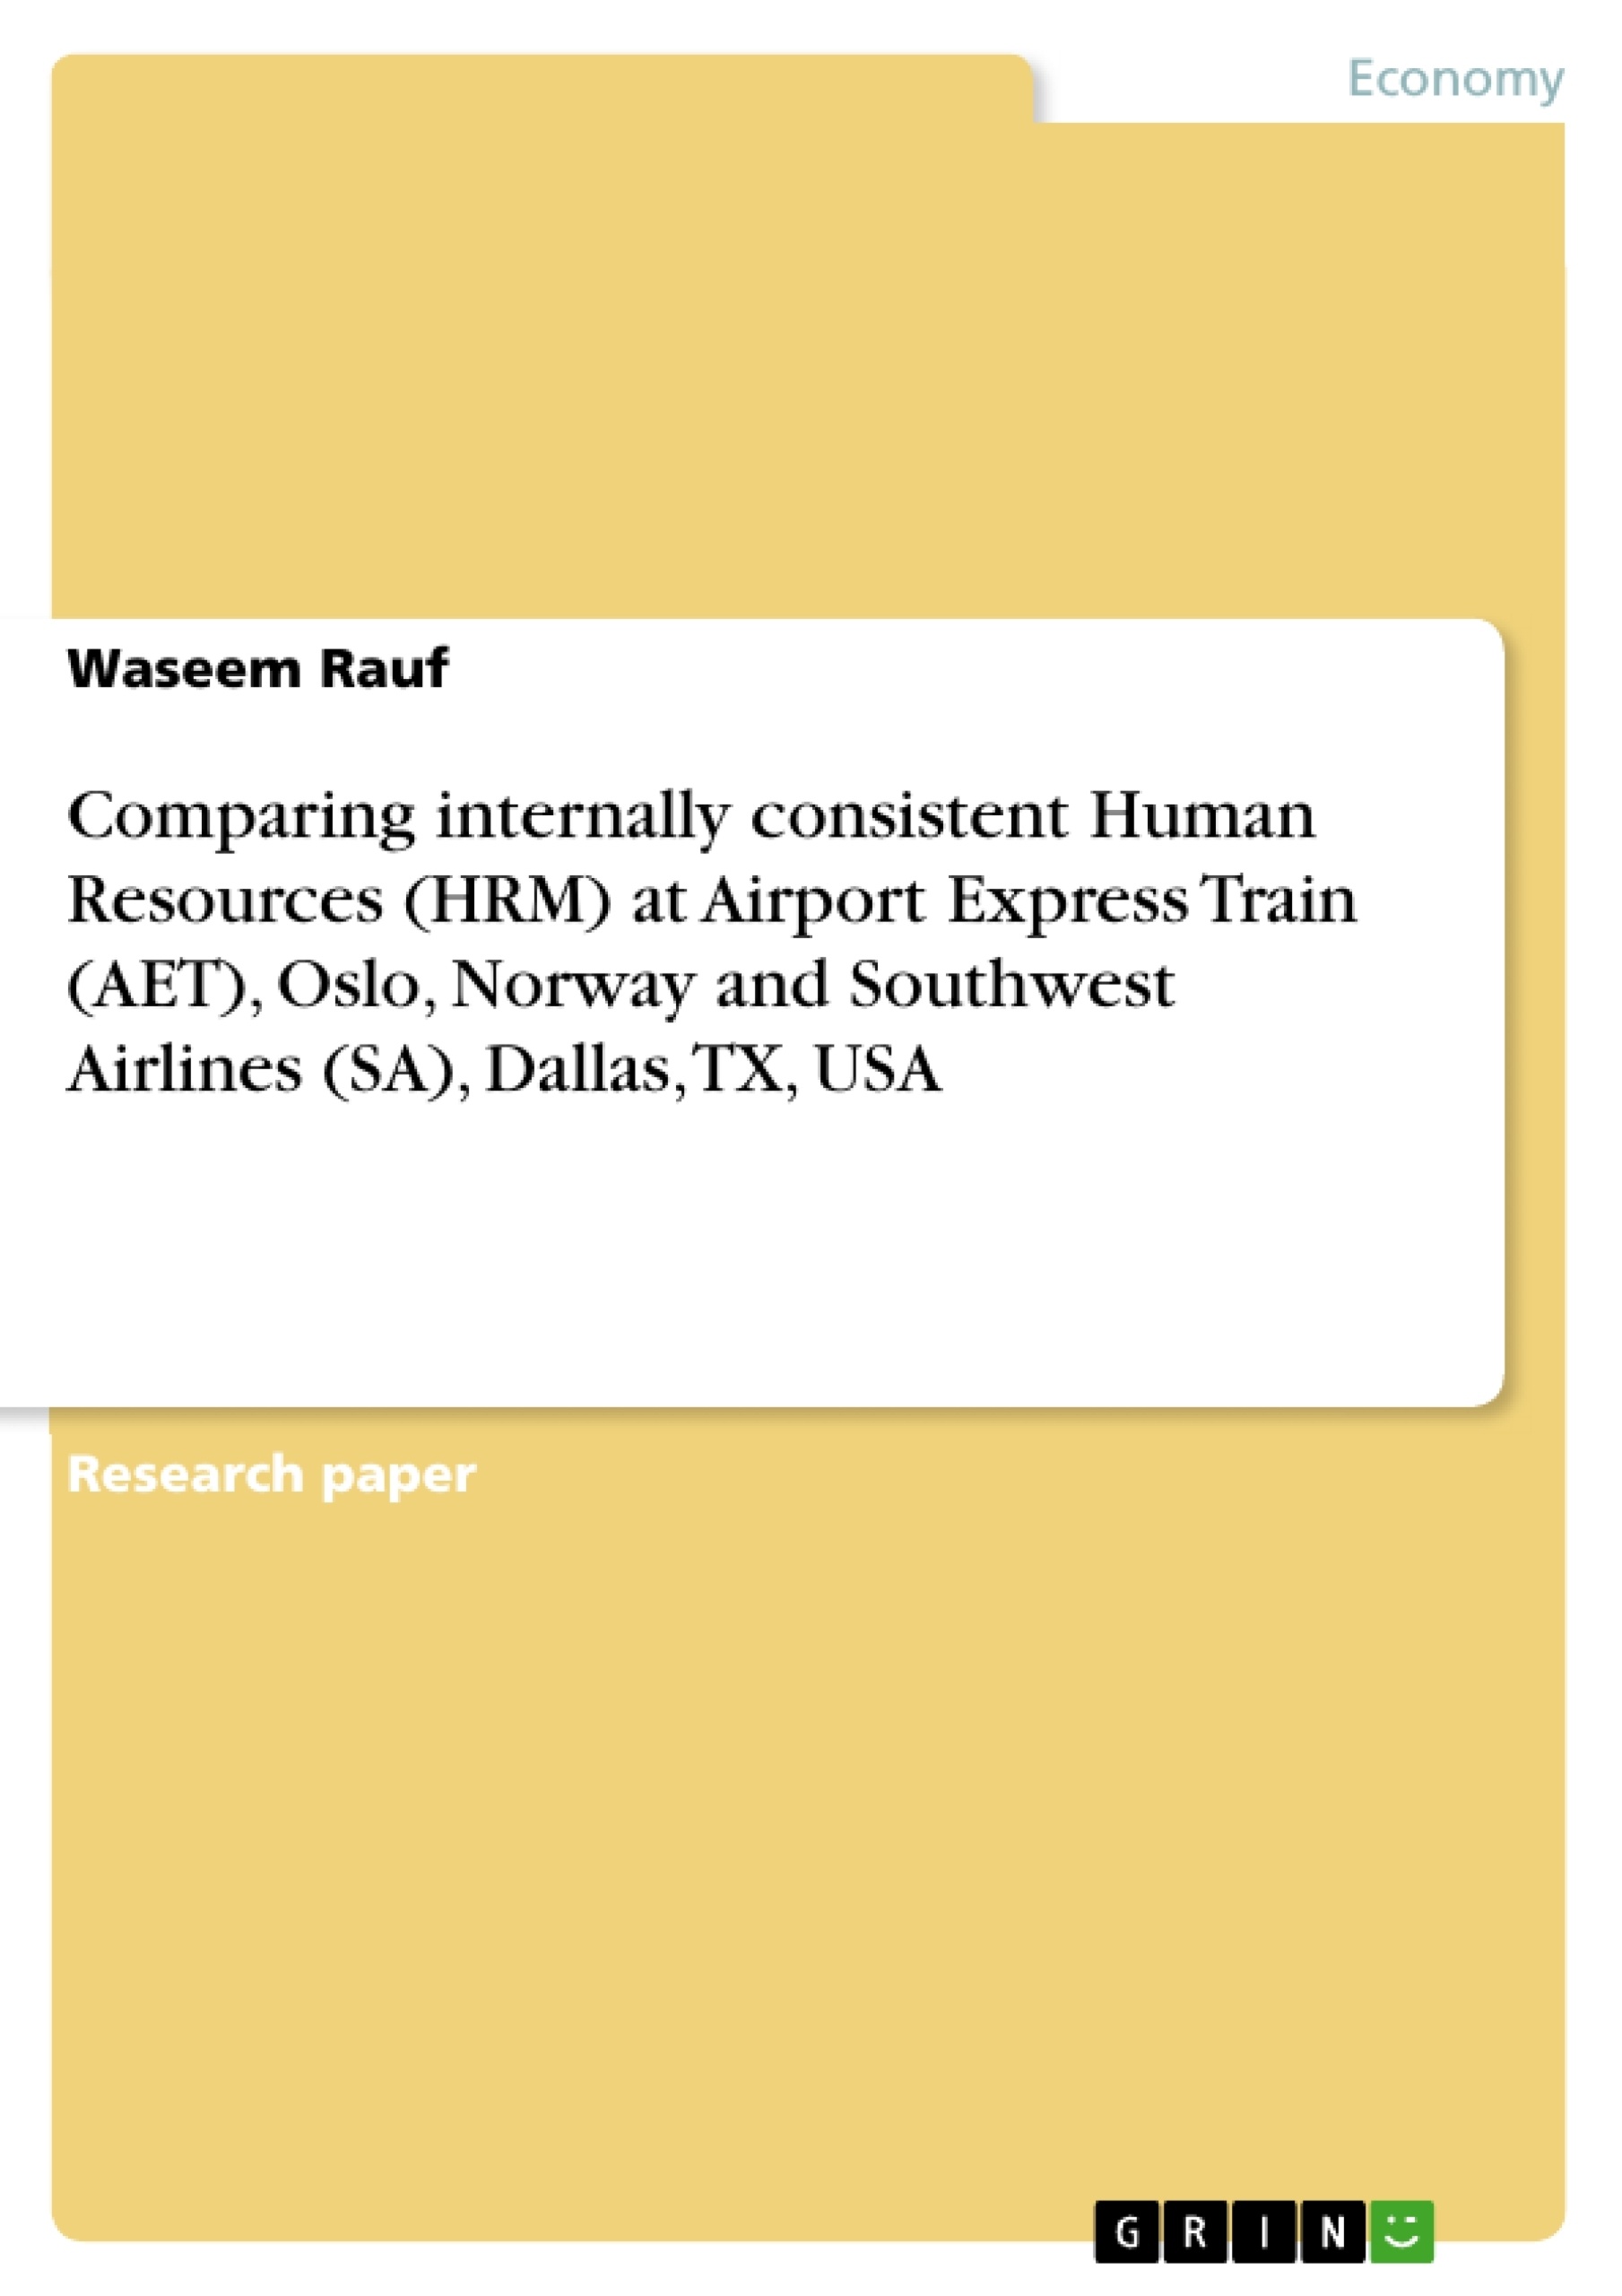 Title: Comparing internally consistent Human Resources (HRM) at Airport Express Train (AET), Oslo, Norway and Southwest Airlines (SA), Dallas, TX, USA